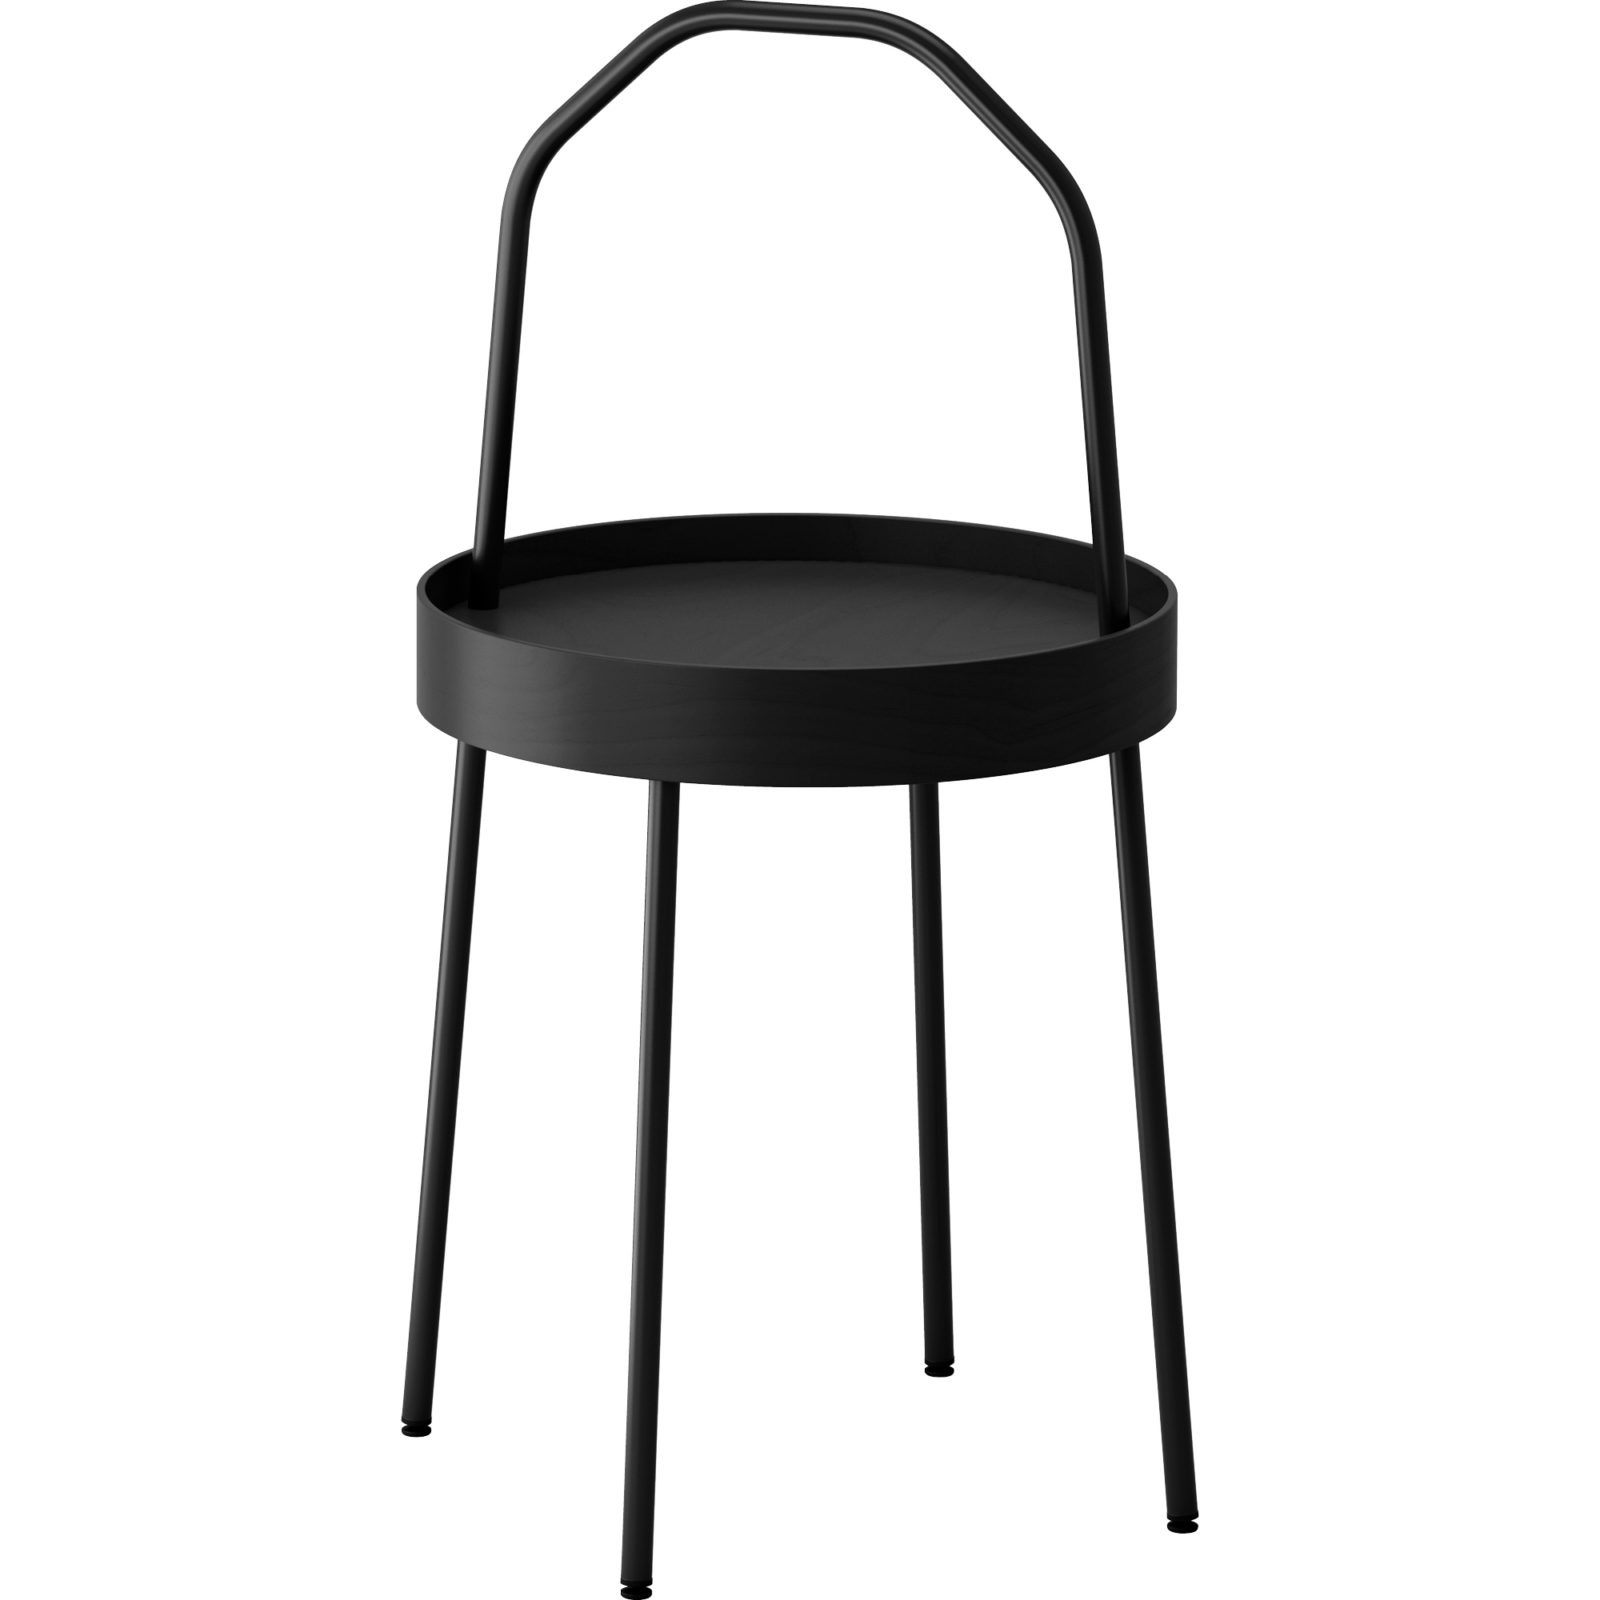 Small black side table with a handle, BURVIK.